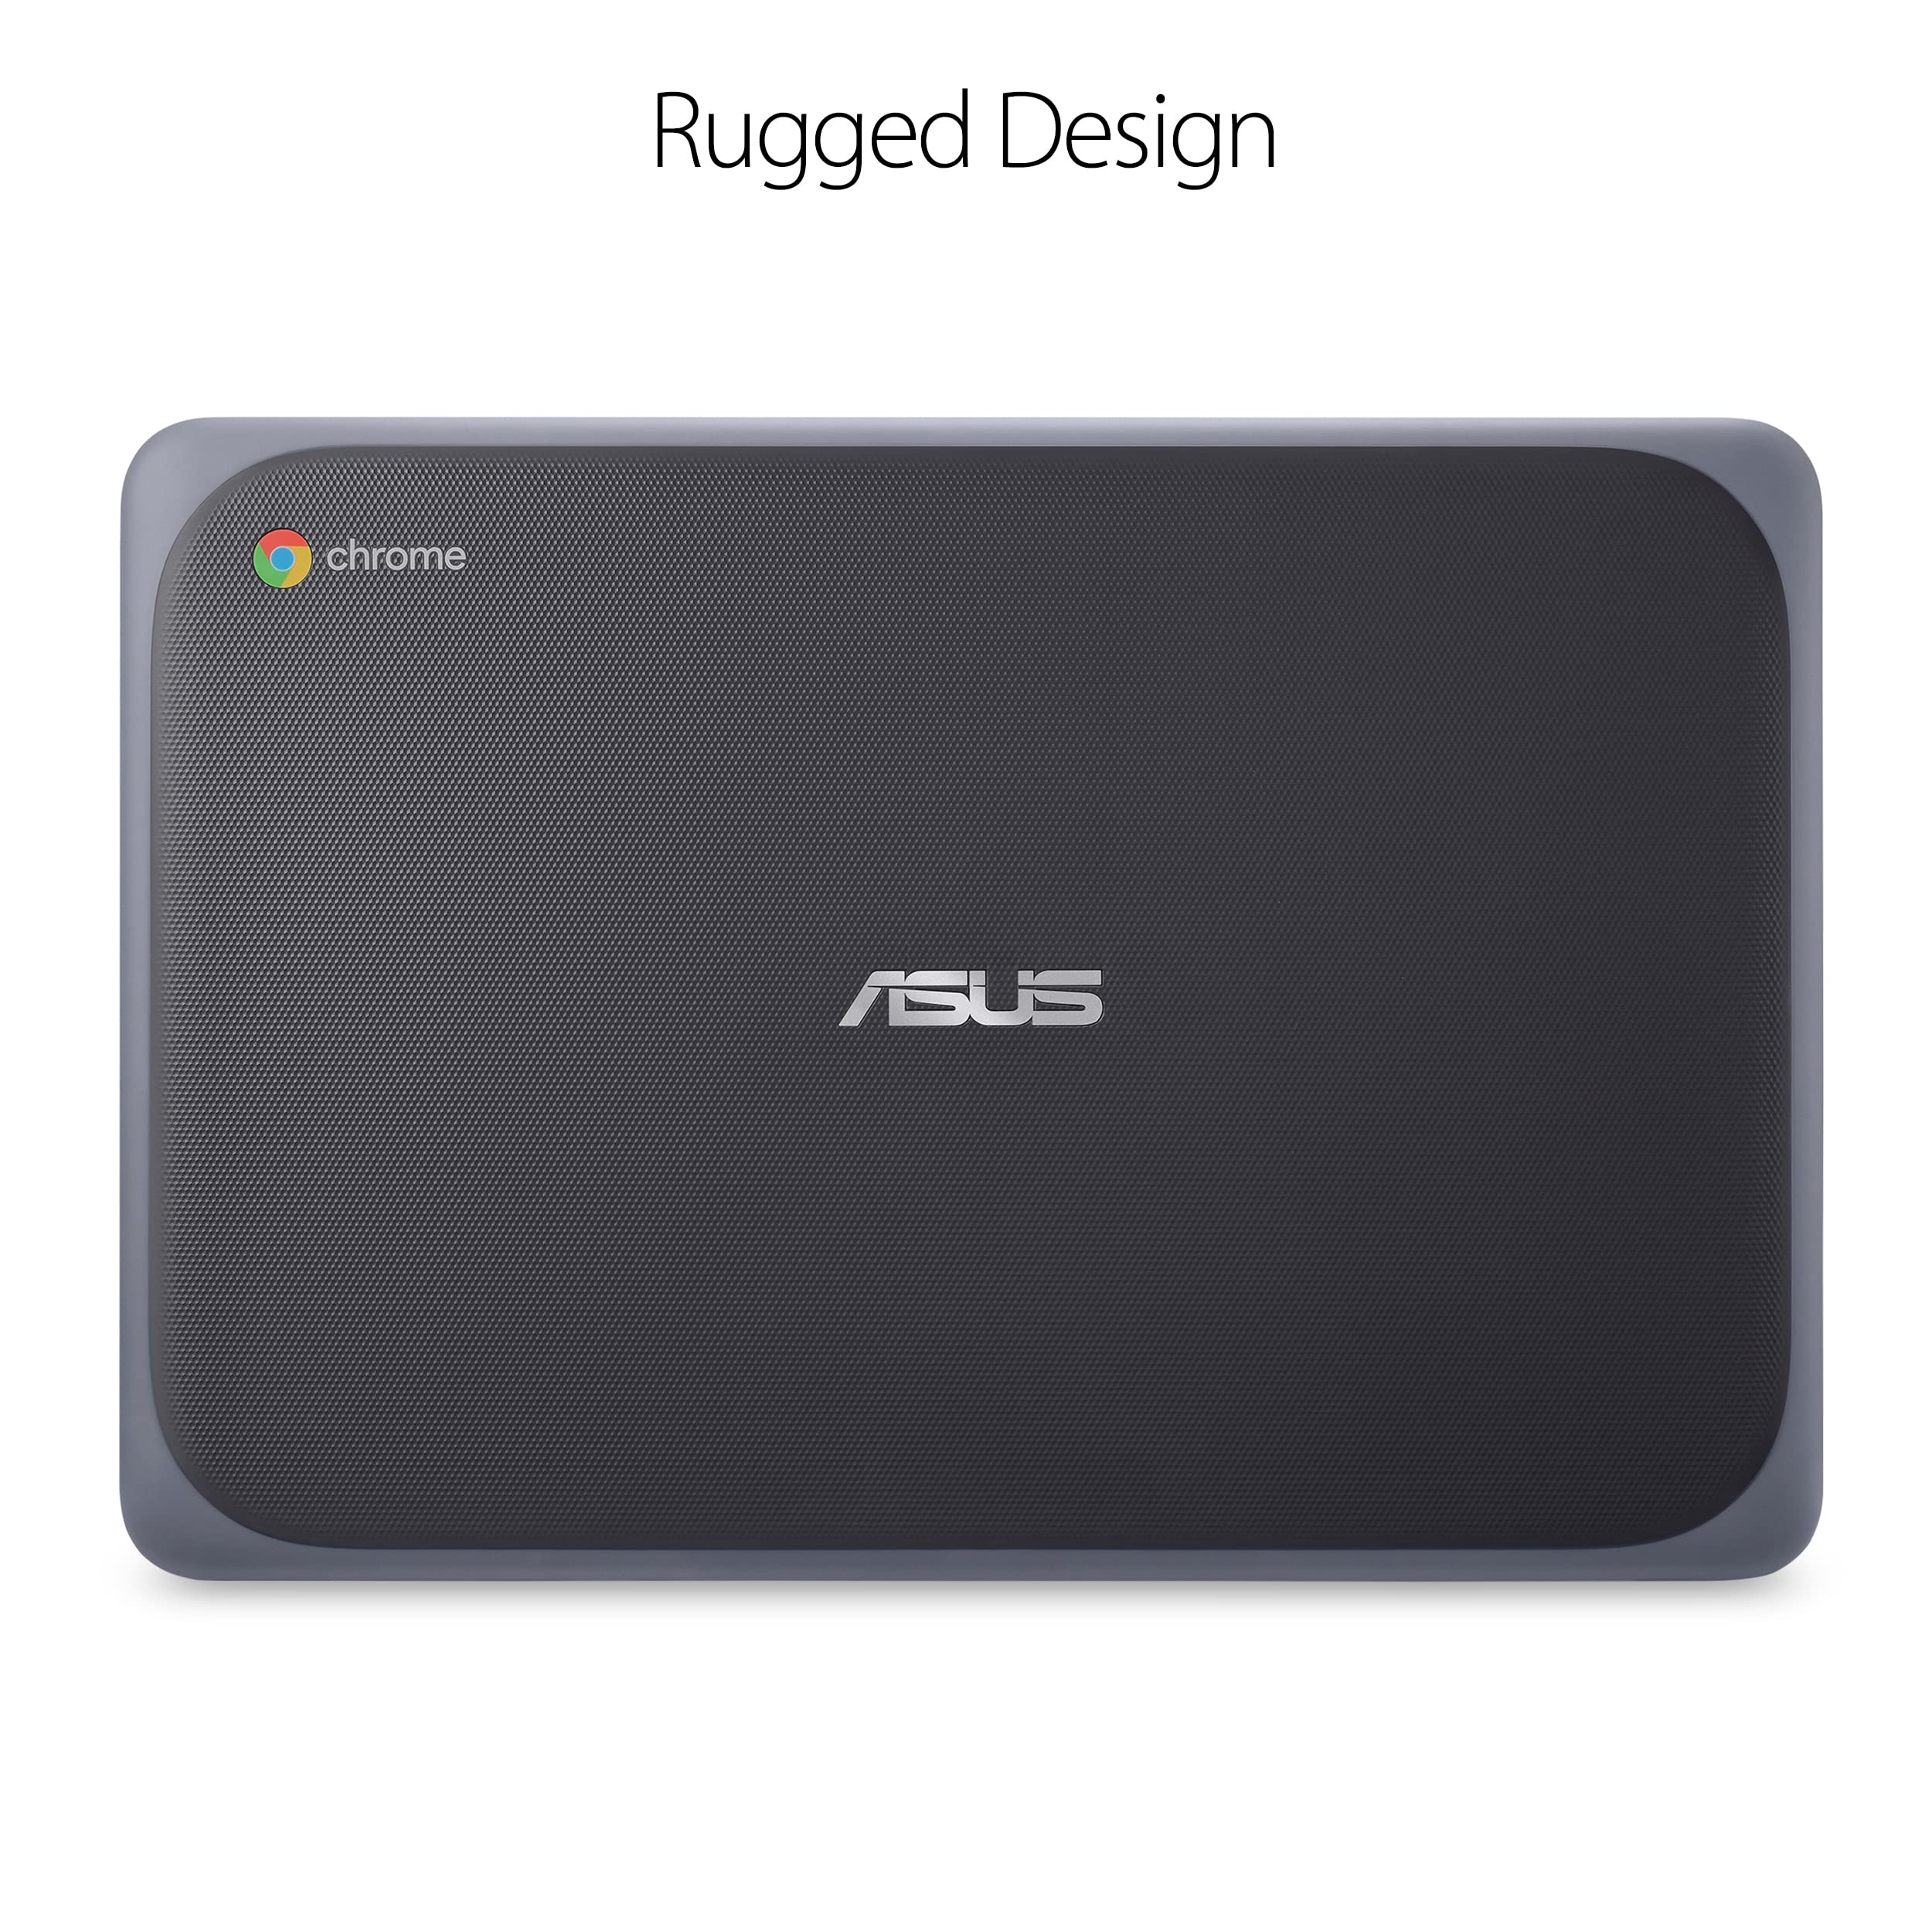 ASUS Chromebook C203XA Rugged & Spill Resistant Laptop, 11.6